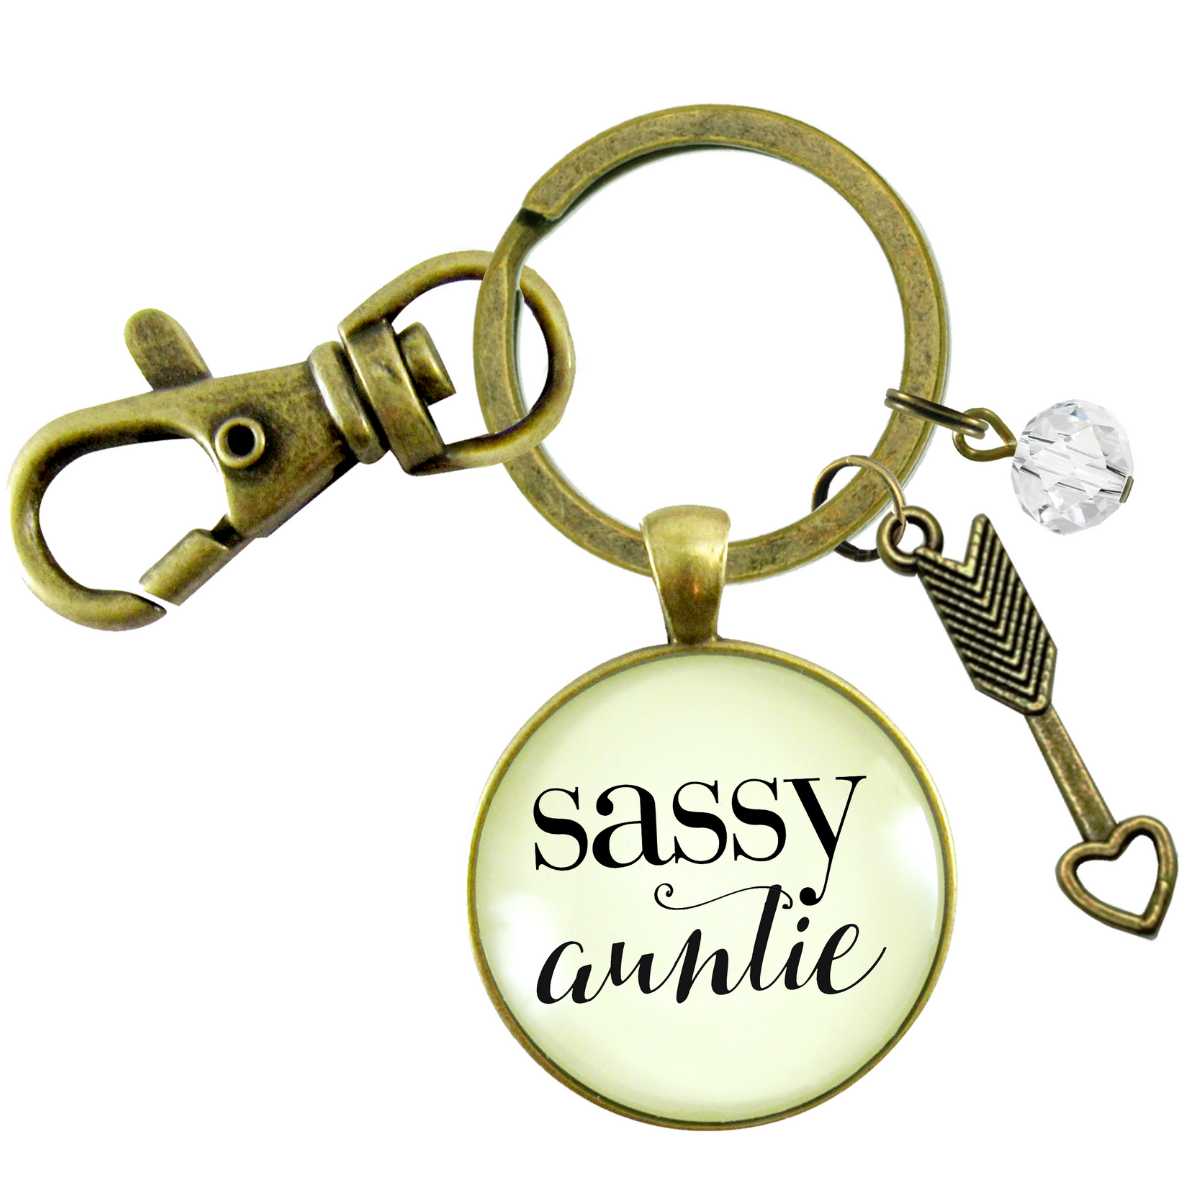 Sassy Auntie Keychain Glam Quote Fun Gift Vintage Inspired Jewelry For Women - Gutsy Goodness Handmade Jewelry;Sassy Auntie Keychain Glam Quote Fun Gift Vintage Inspired Jewelry For Women - Gutsy Goodness Handmade Jewelry Gifts